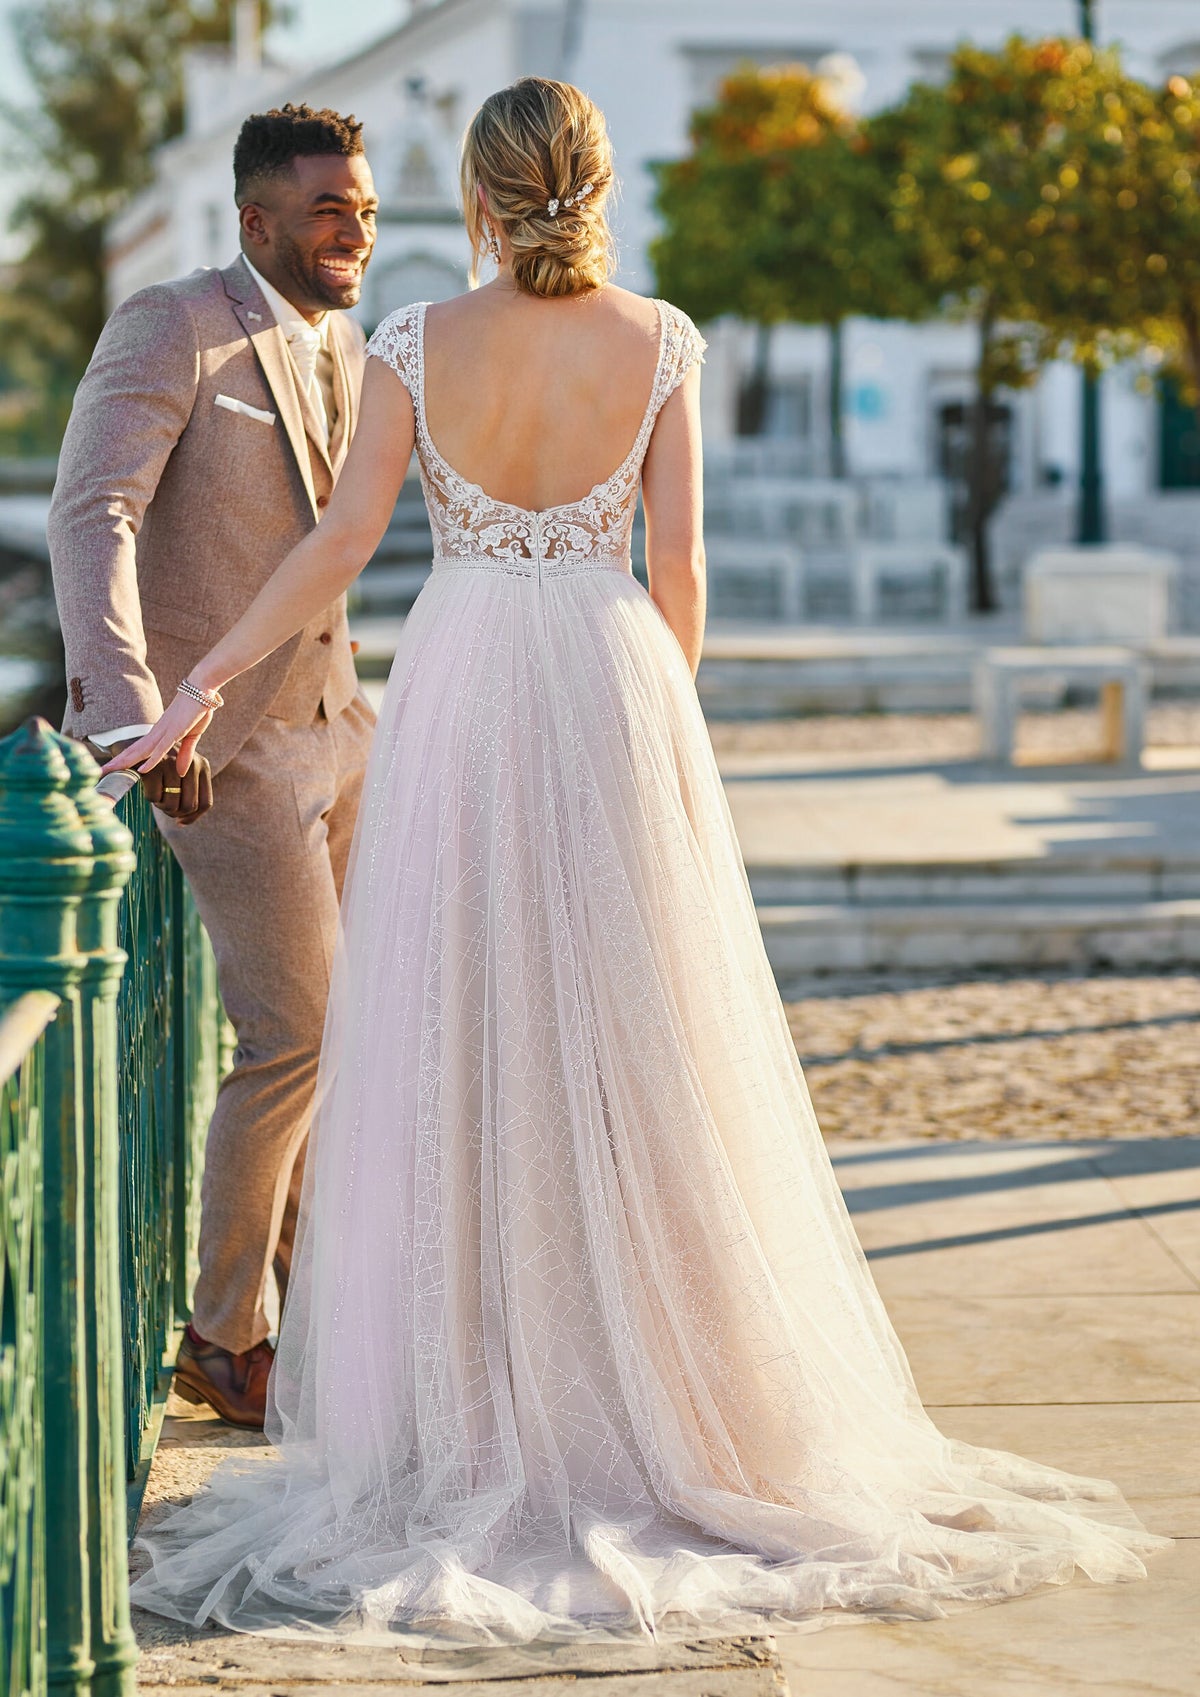 Romantic Elegant Champagne Wedding Dress Bridal Gown A-line Silhouette Deep V Neckline Cap Sleeves Tulle Skirt Lace Bodice Train